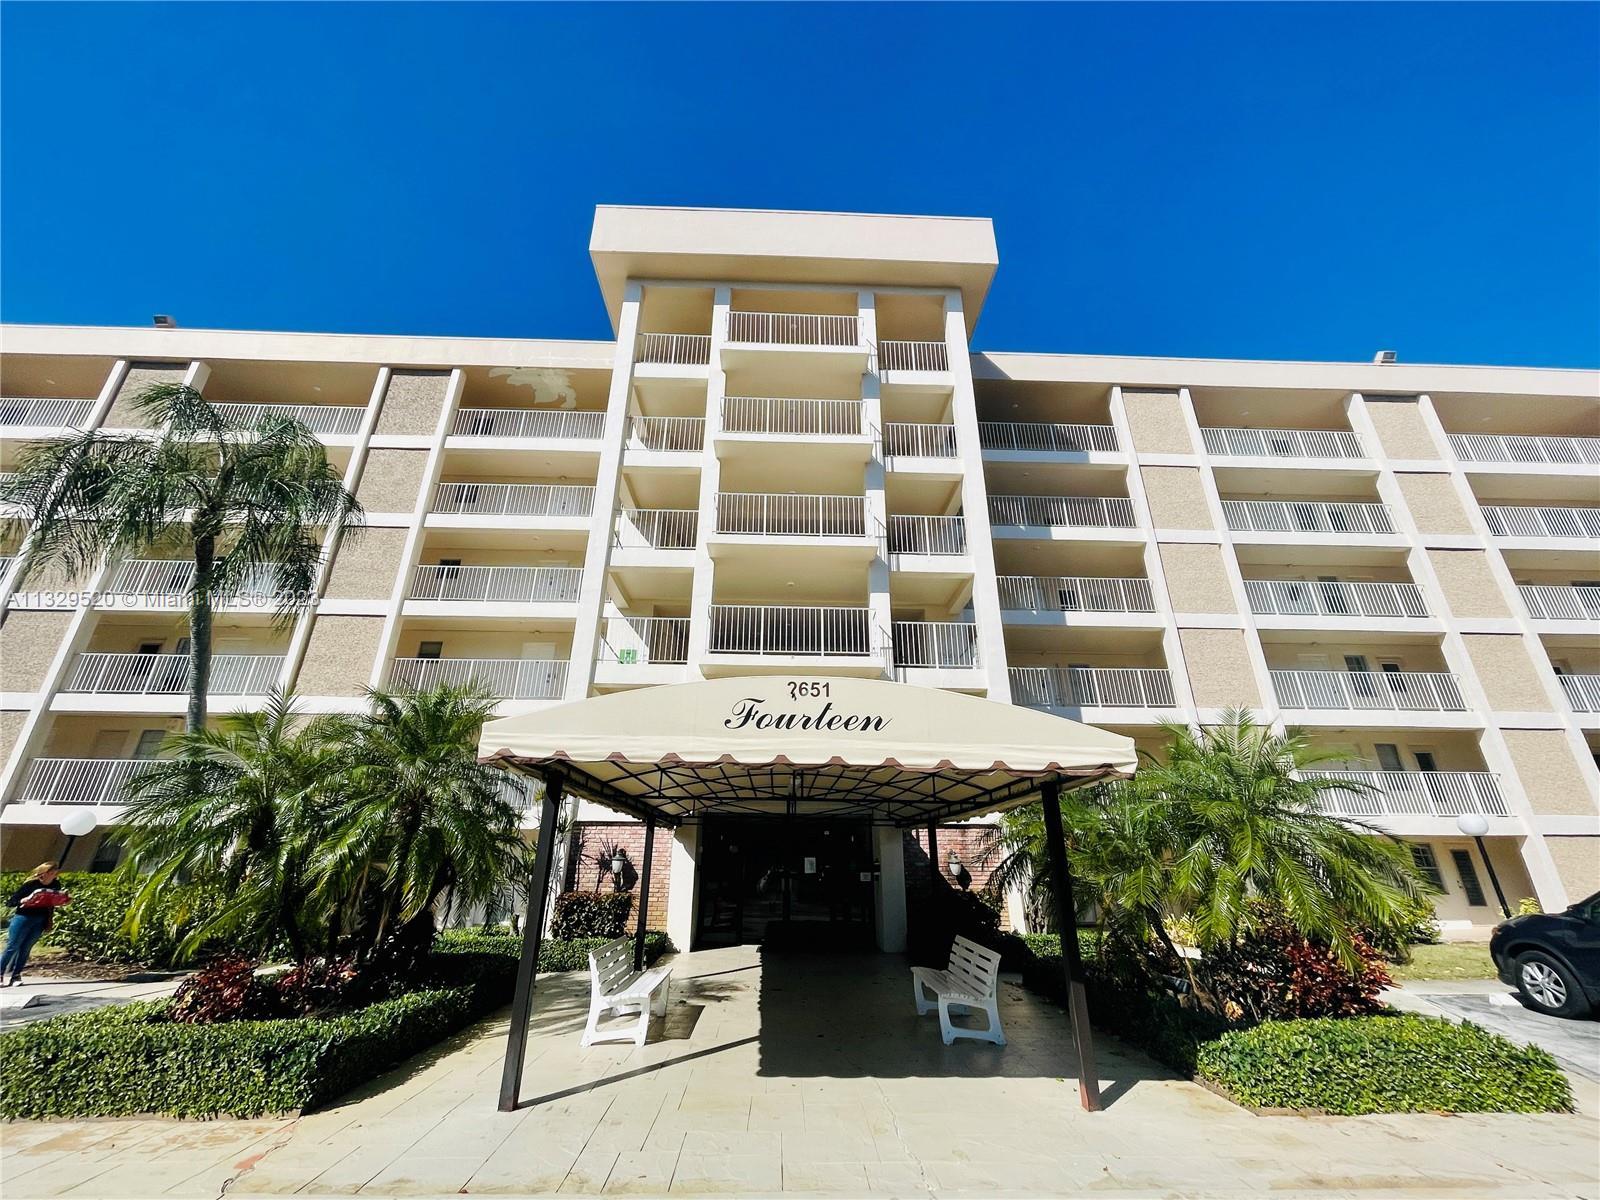 Spacious 1 bed/1.5 bath unit. HOA includes- water, basic cable, wifi, and amenities. It has a renova